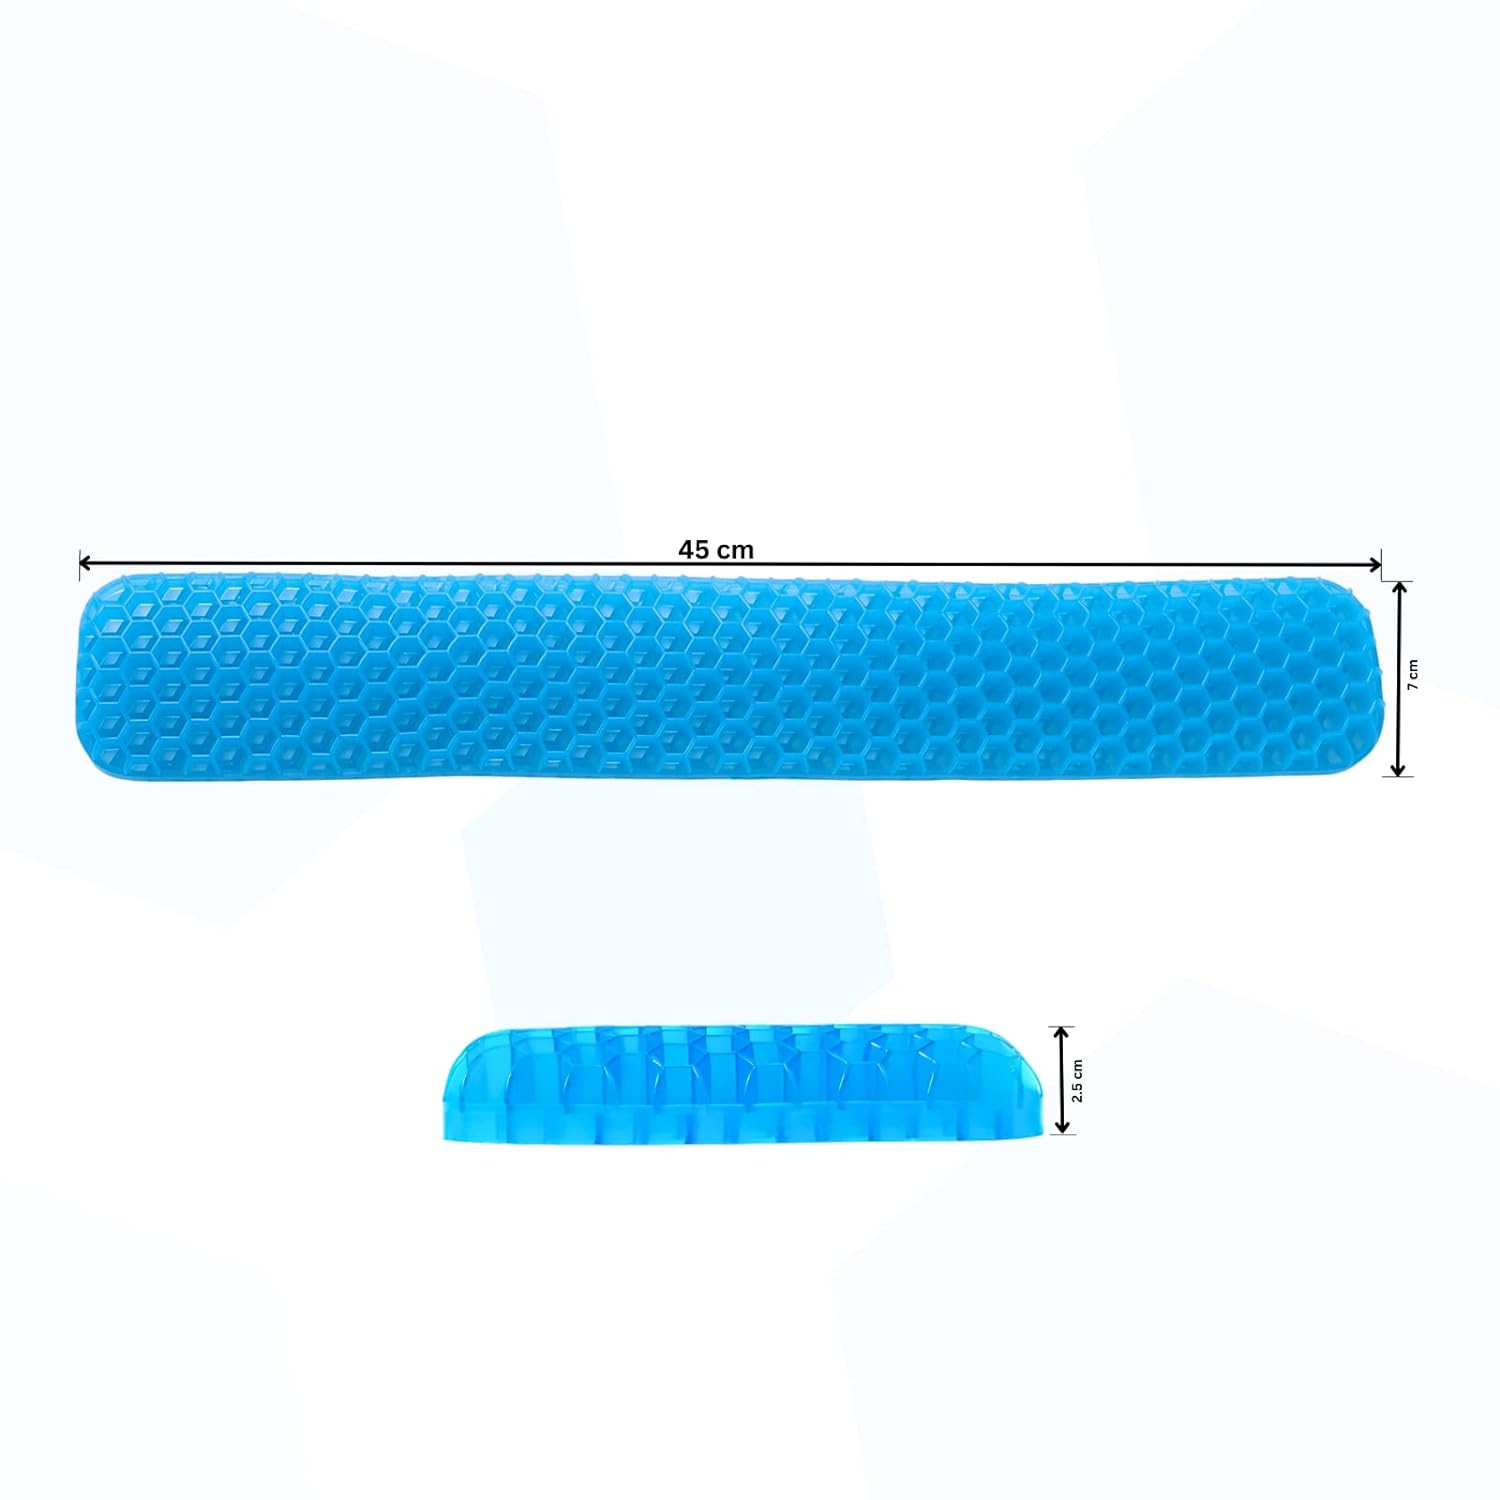 Kuber Industries Keyboard Wrist Pad | Mouse Wrist Pad | Non-Slip Bottom Wrist Pad | Relieve Wrist Pain and Fatigue | Ideal for Typing and Gaming | T-D002 | Blue